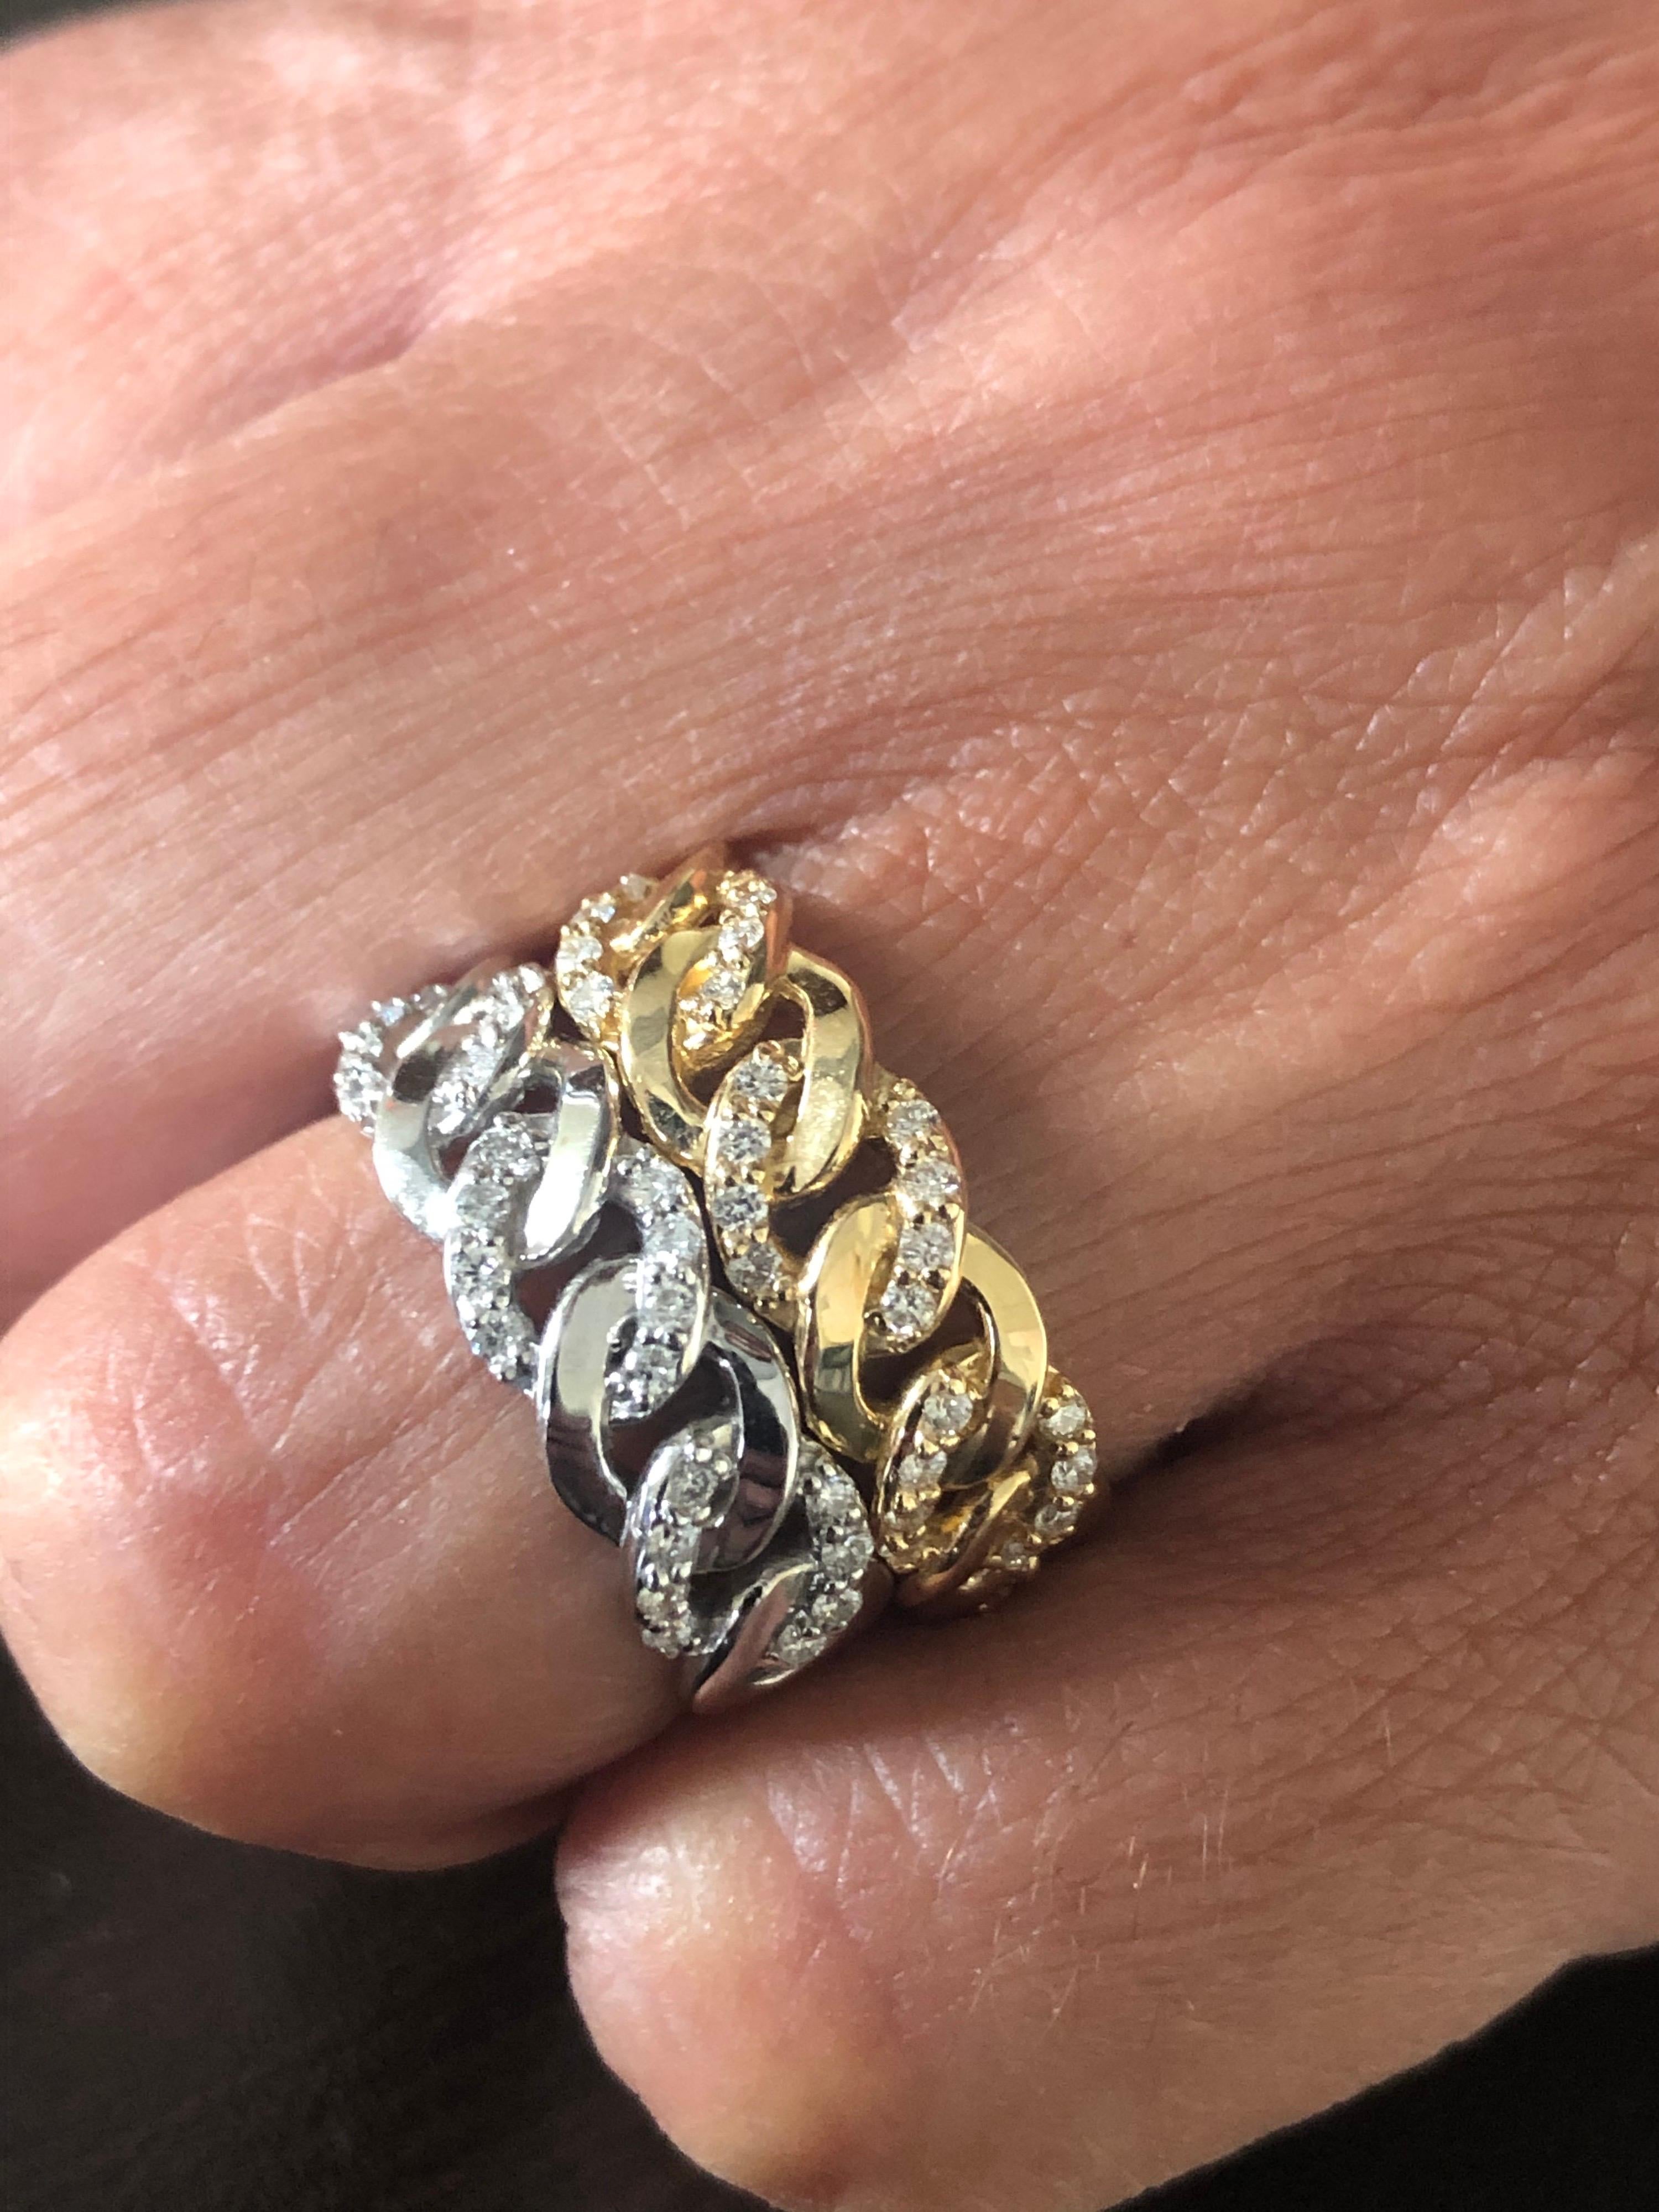 14K white and yellow gold link rings set 3/4 of the way around. Each ring weighs 0.40 Carats. The color of the stones are G, the clarity is SI1. The rings are a size 6.5. The rings are sold as a set.